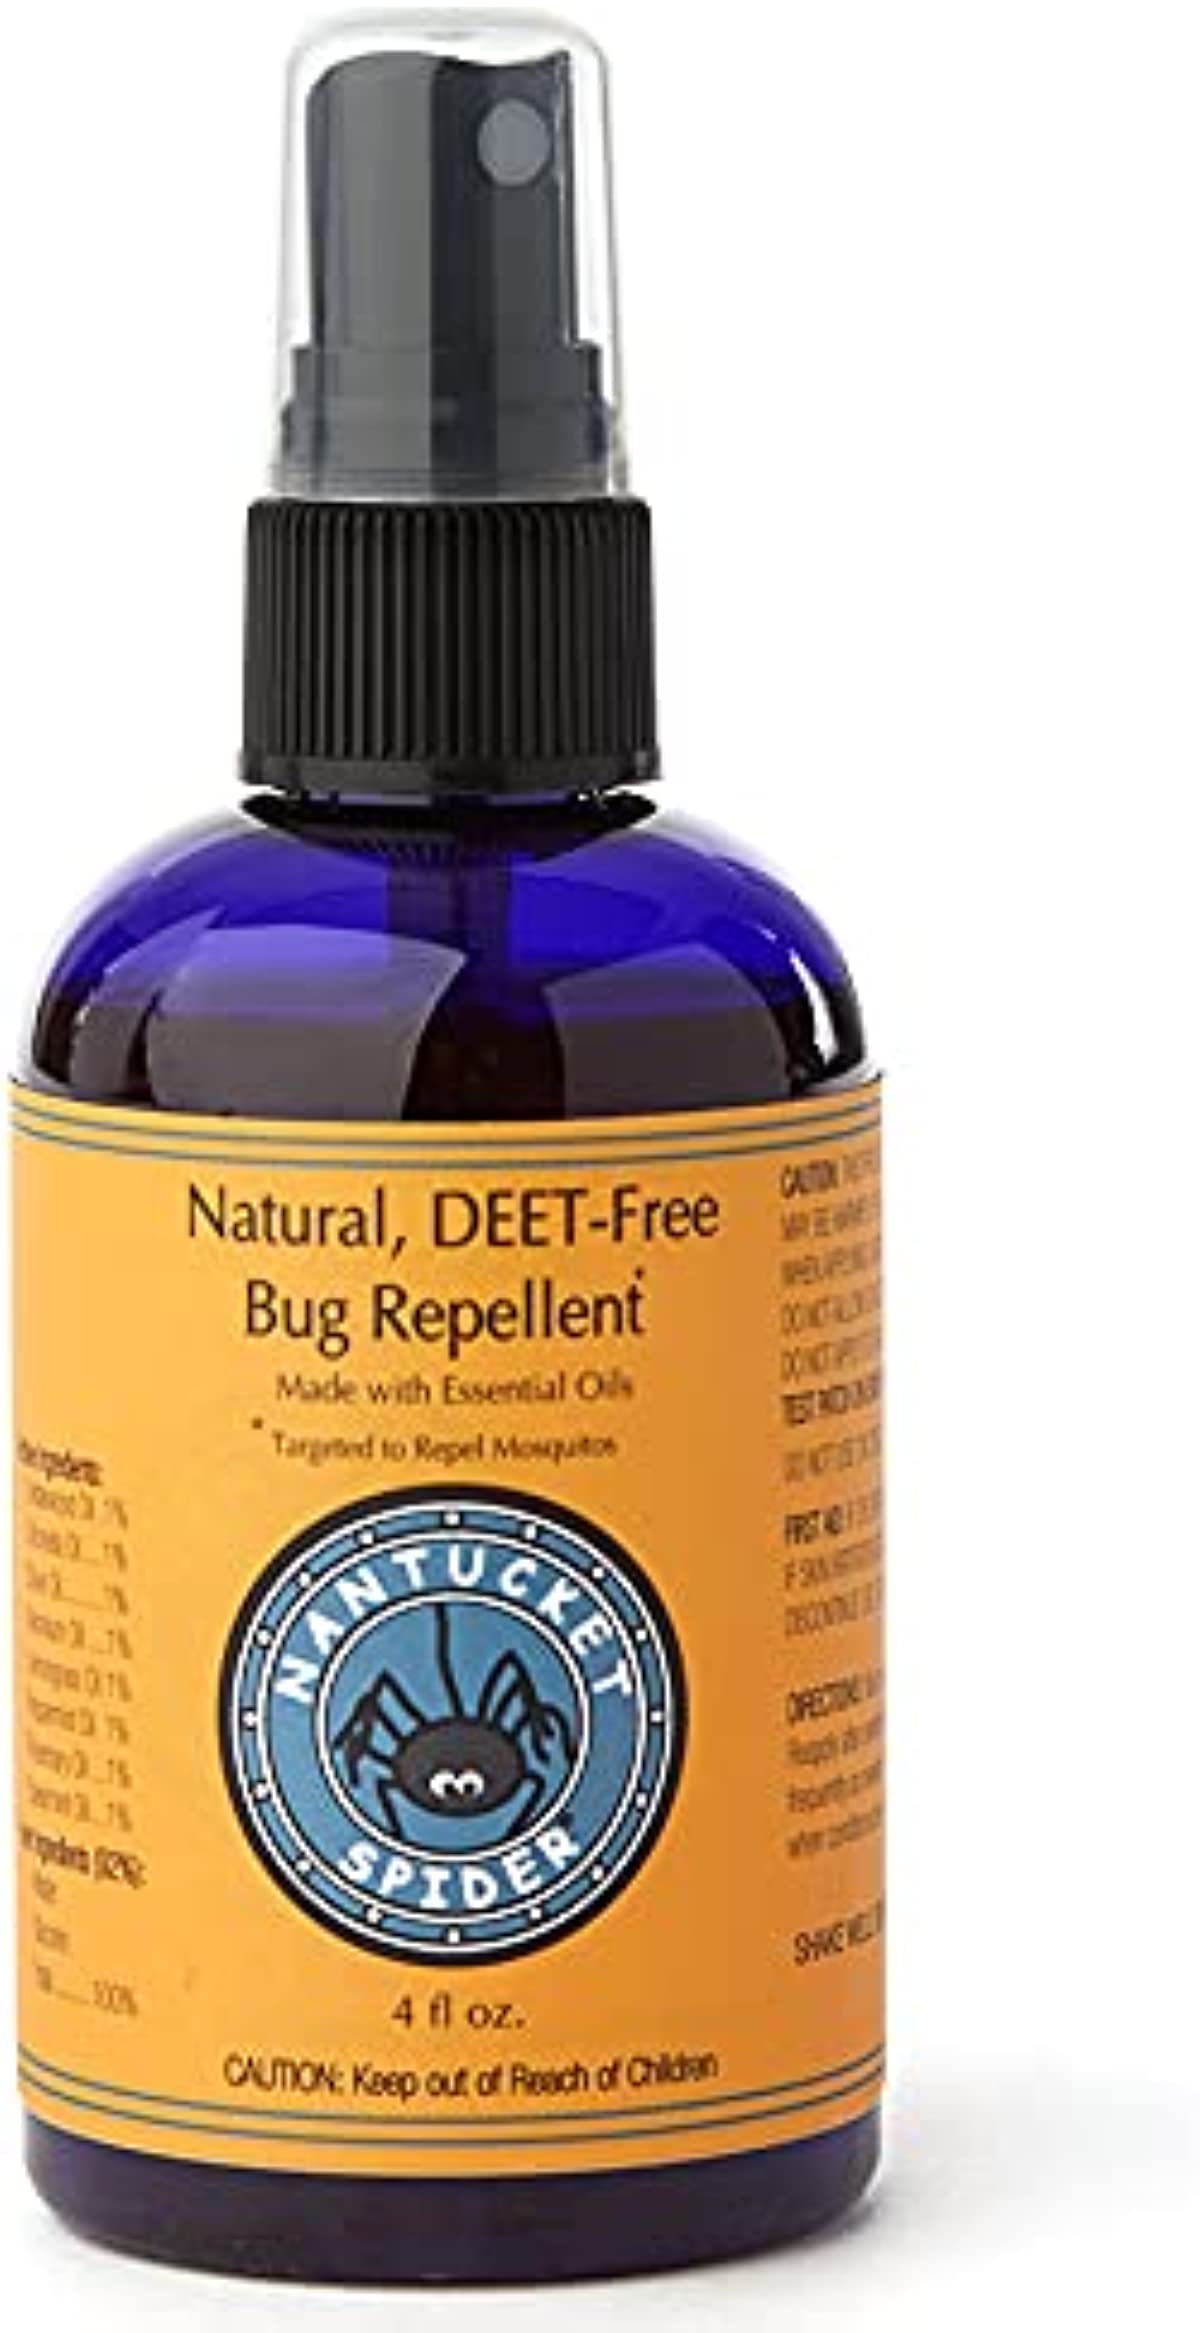 Nantucket Spider Natural Bug Spray for Adults and Kids - 4 oz | Long-Lasting Protection Against Mosquitoes, Biting Flies, Wasps, & No-See-Ums | Deet-Free Organic Essential Oil Insect Repellent